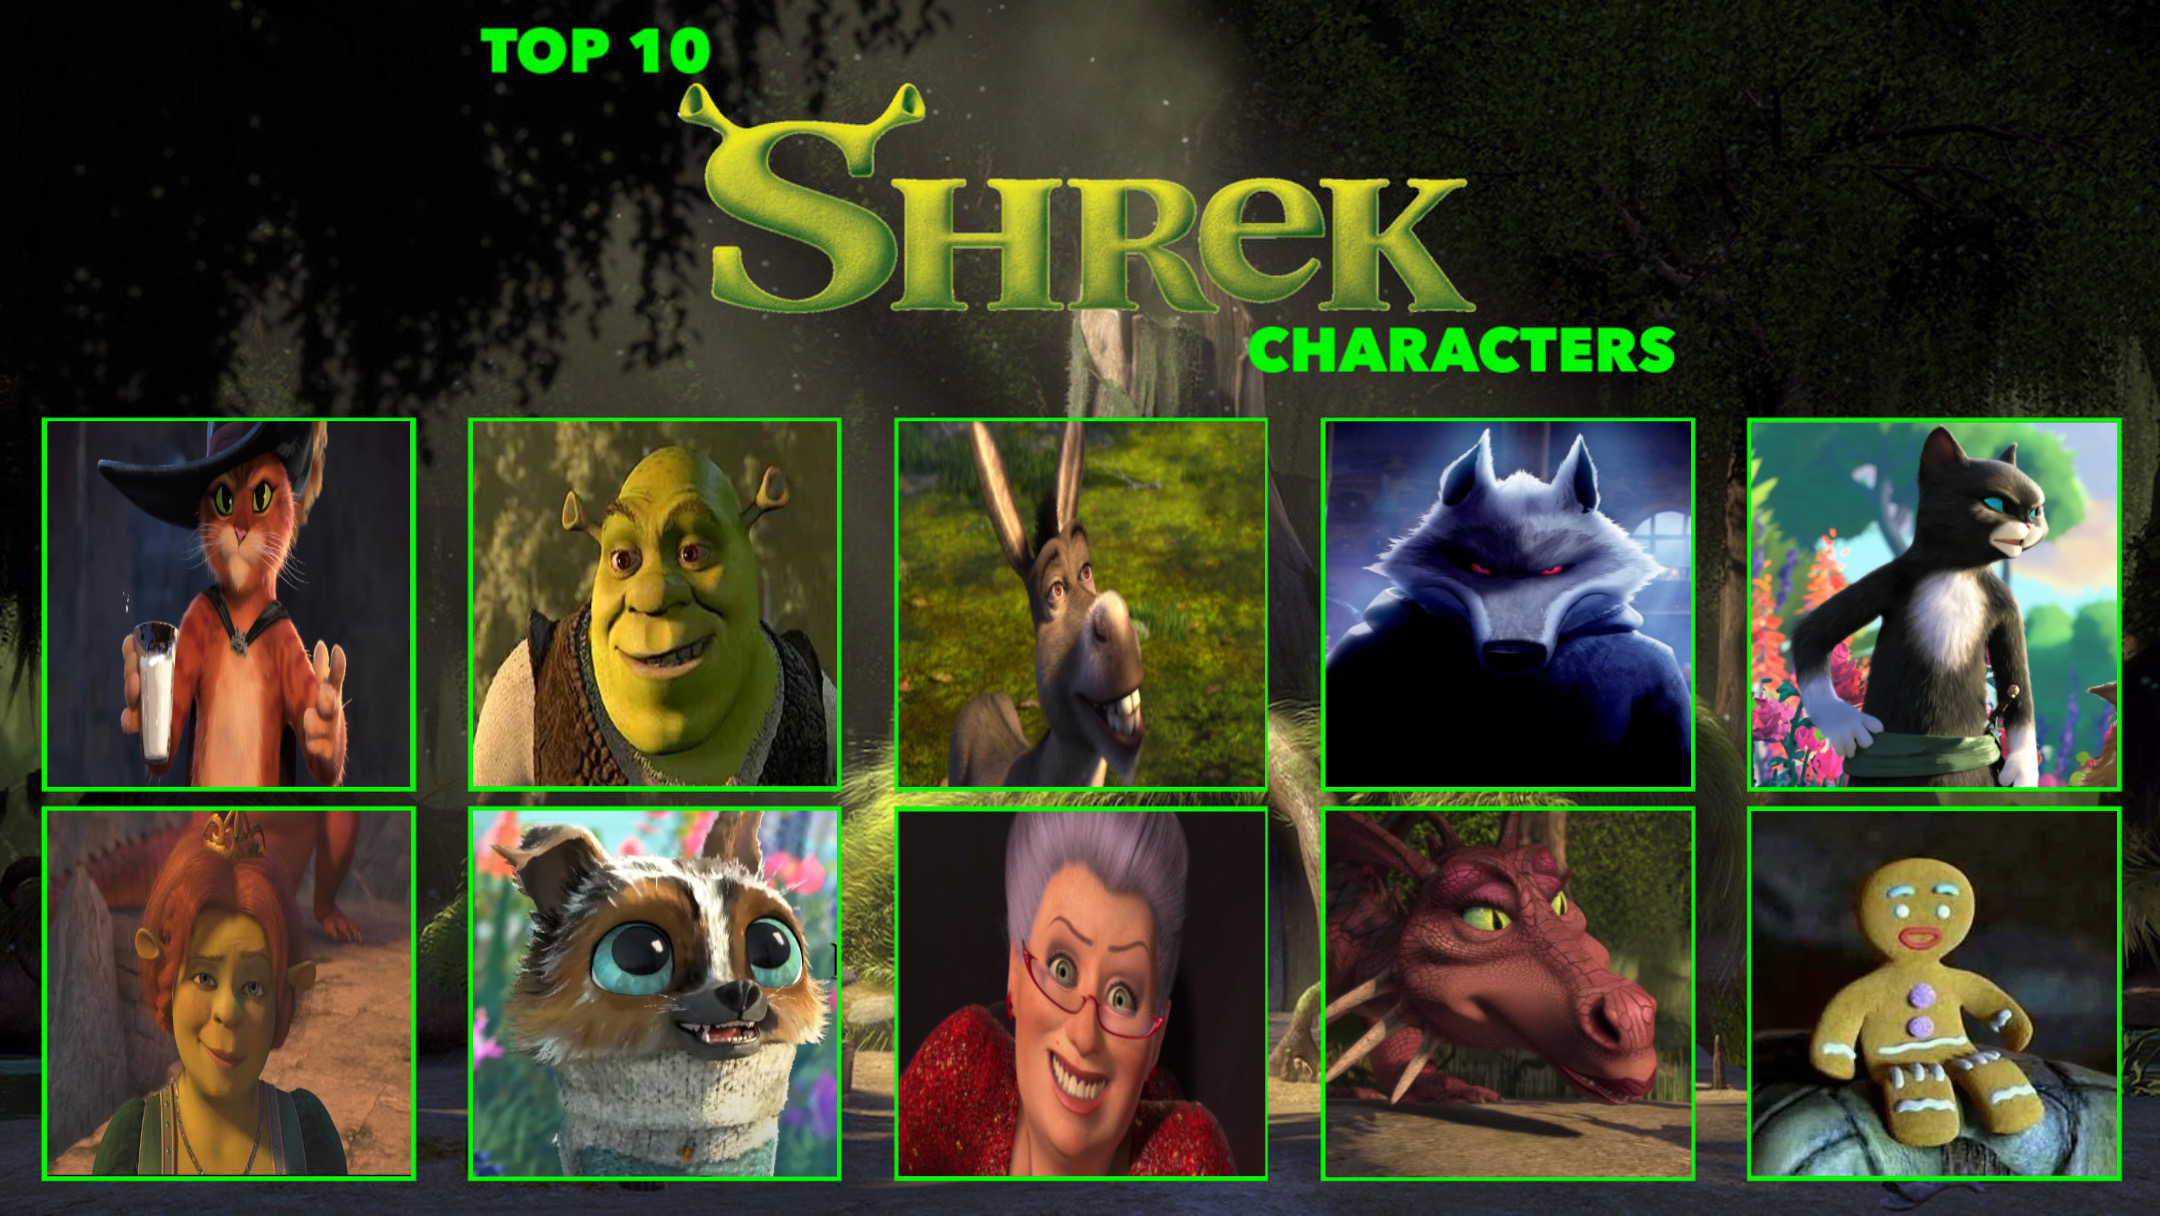 How Shrek went from the world's biggest animated franchise to the